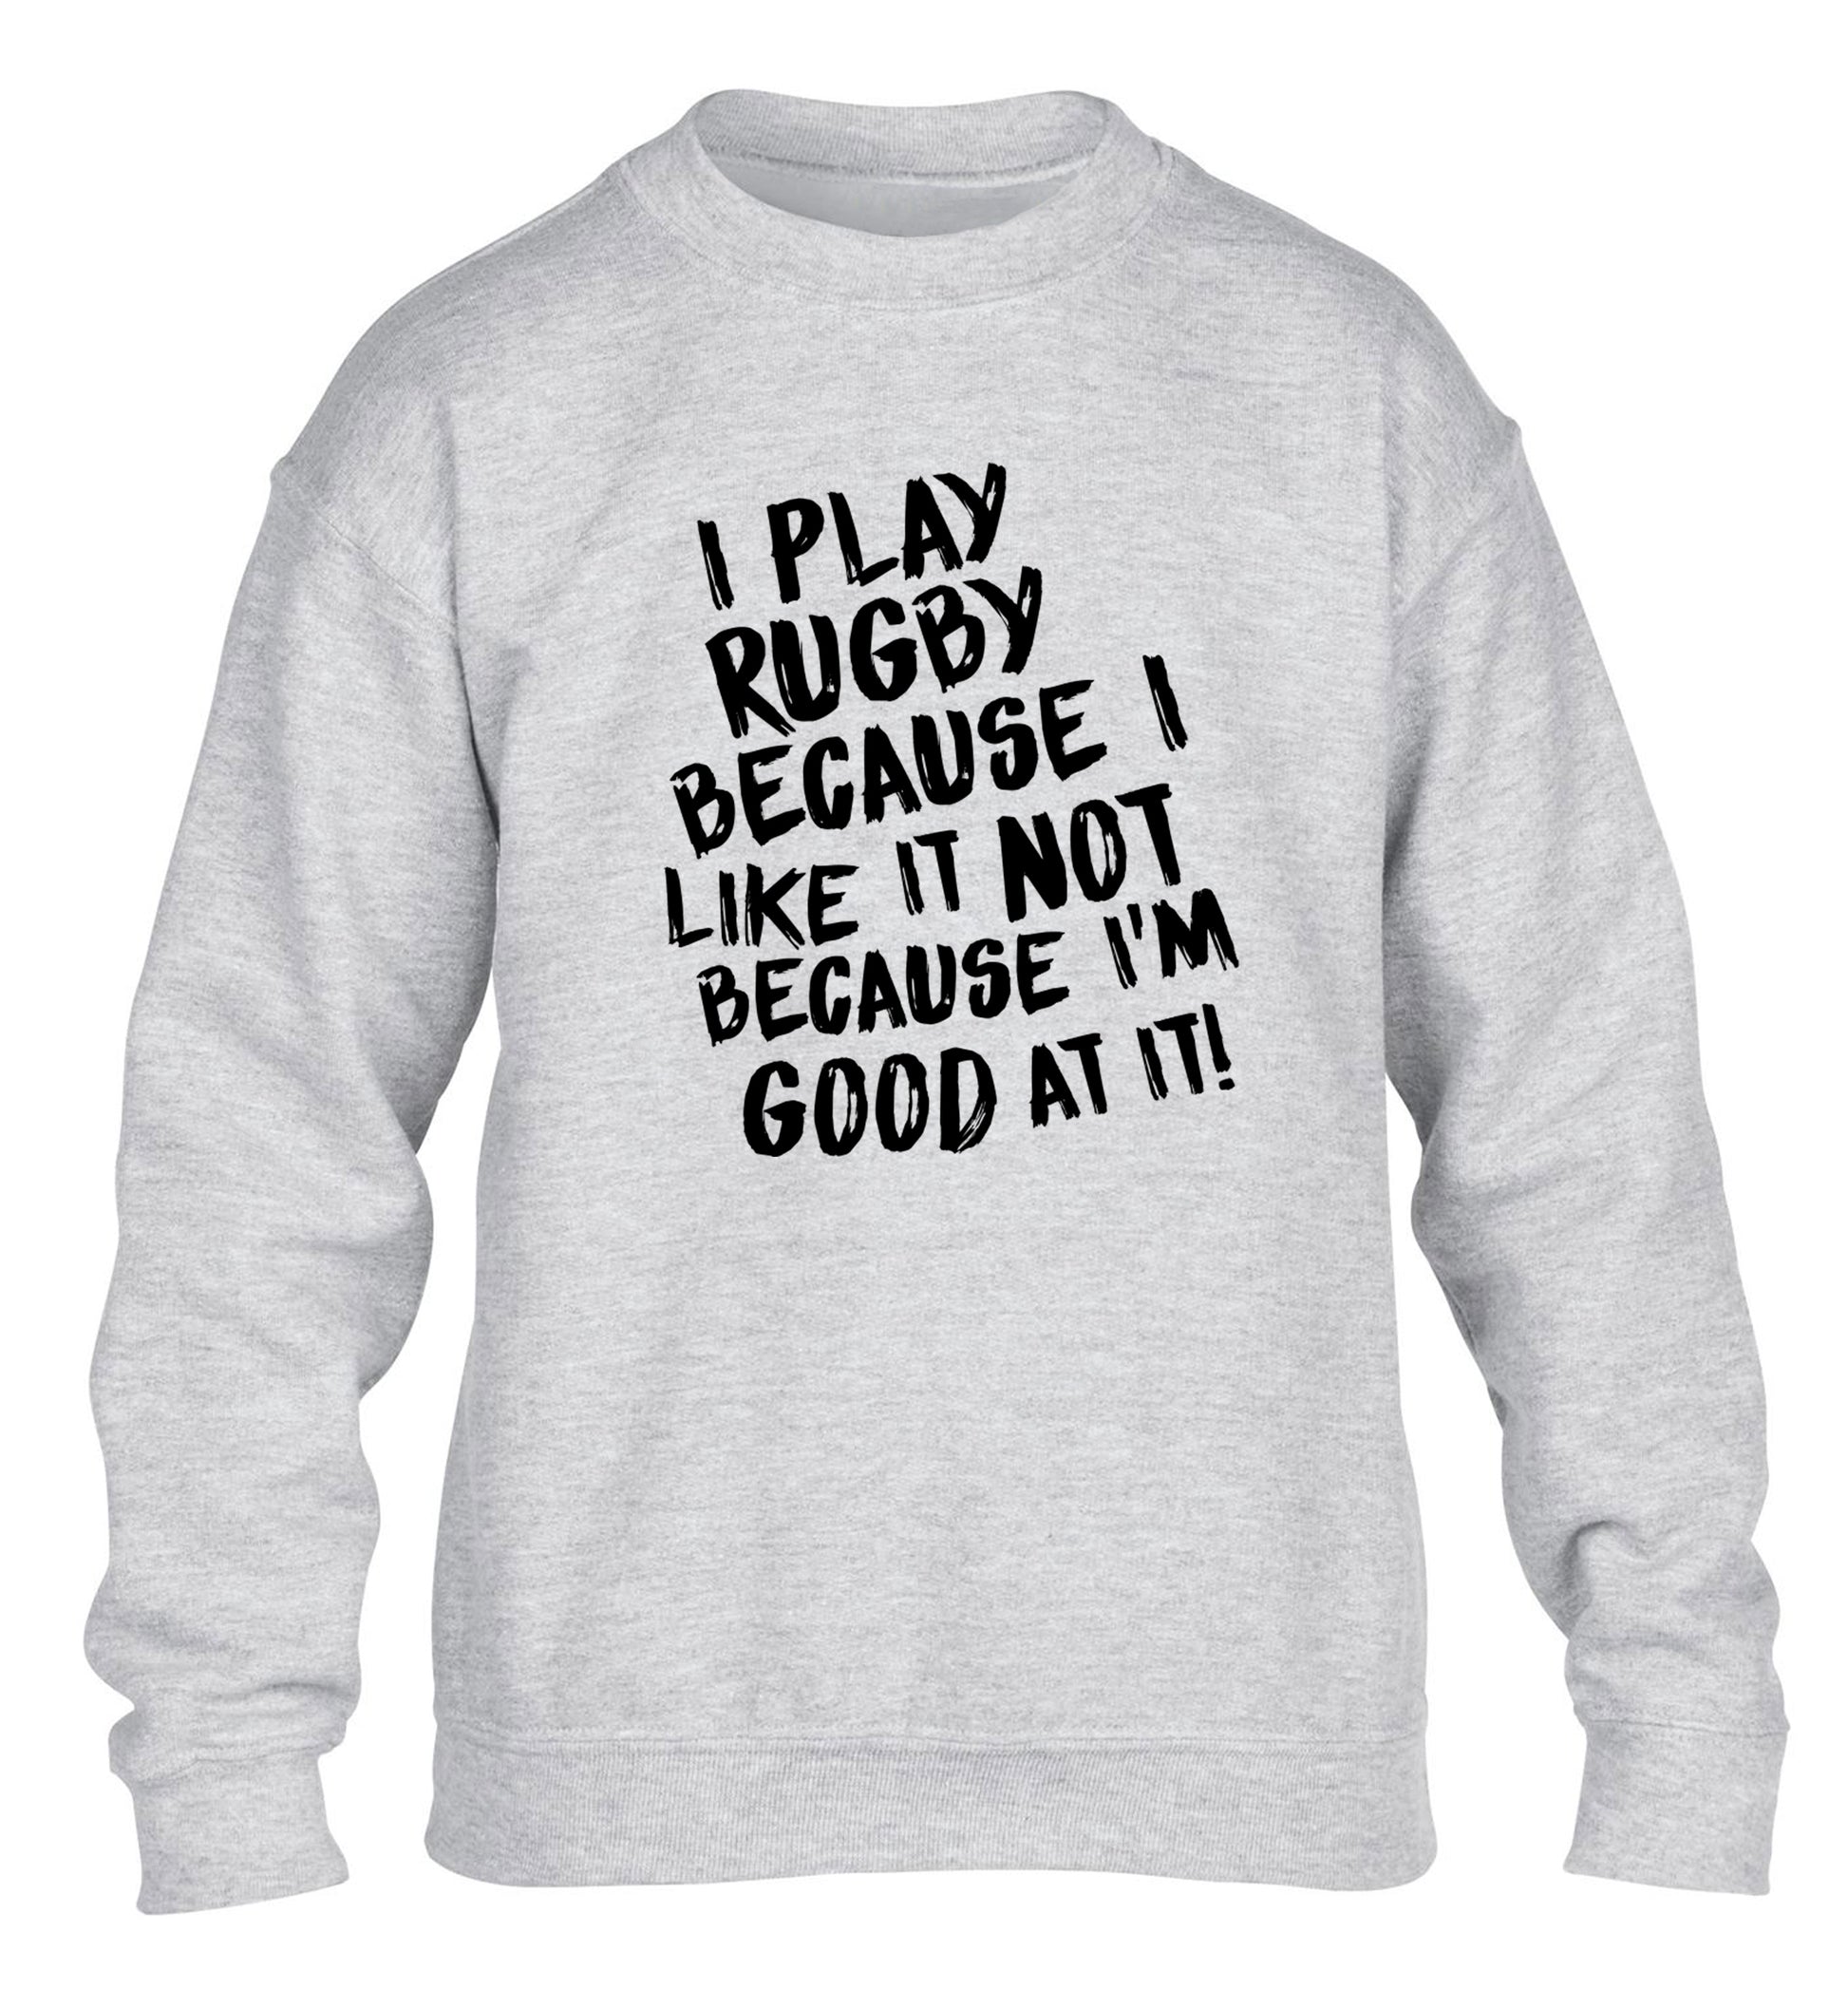 I play rugby because I like it not because I'm good at it children's grey sweater 12-13 Years